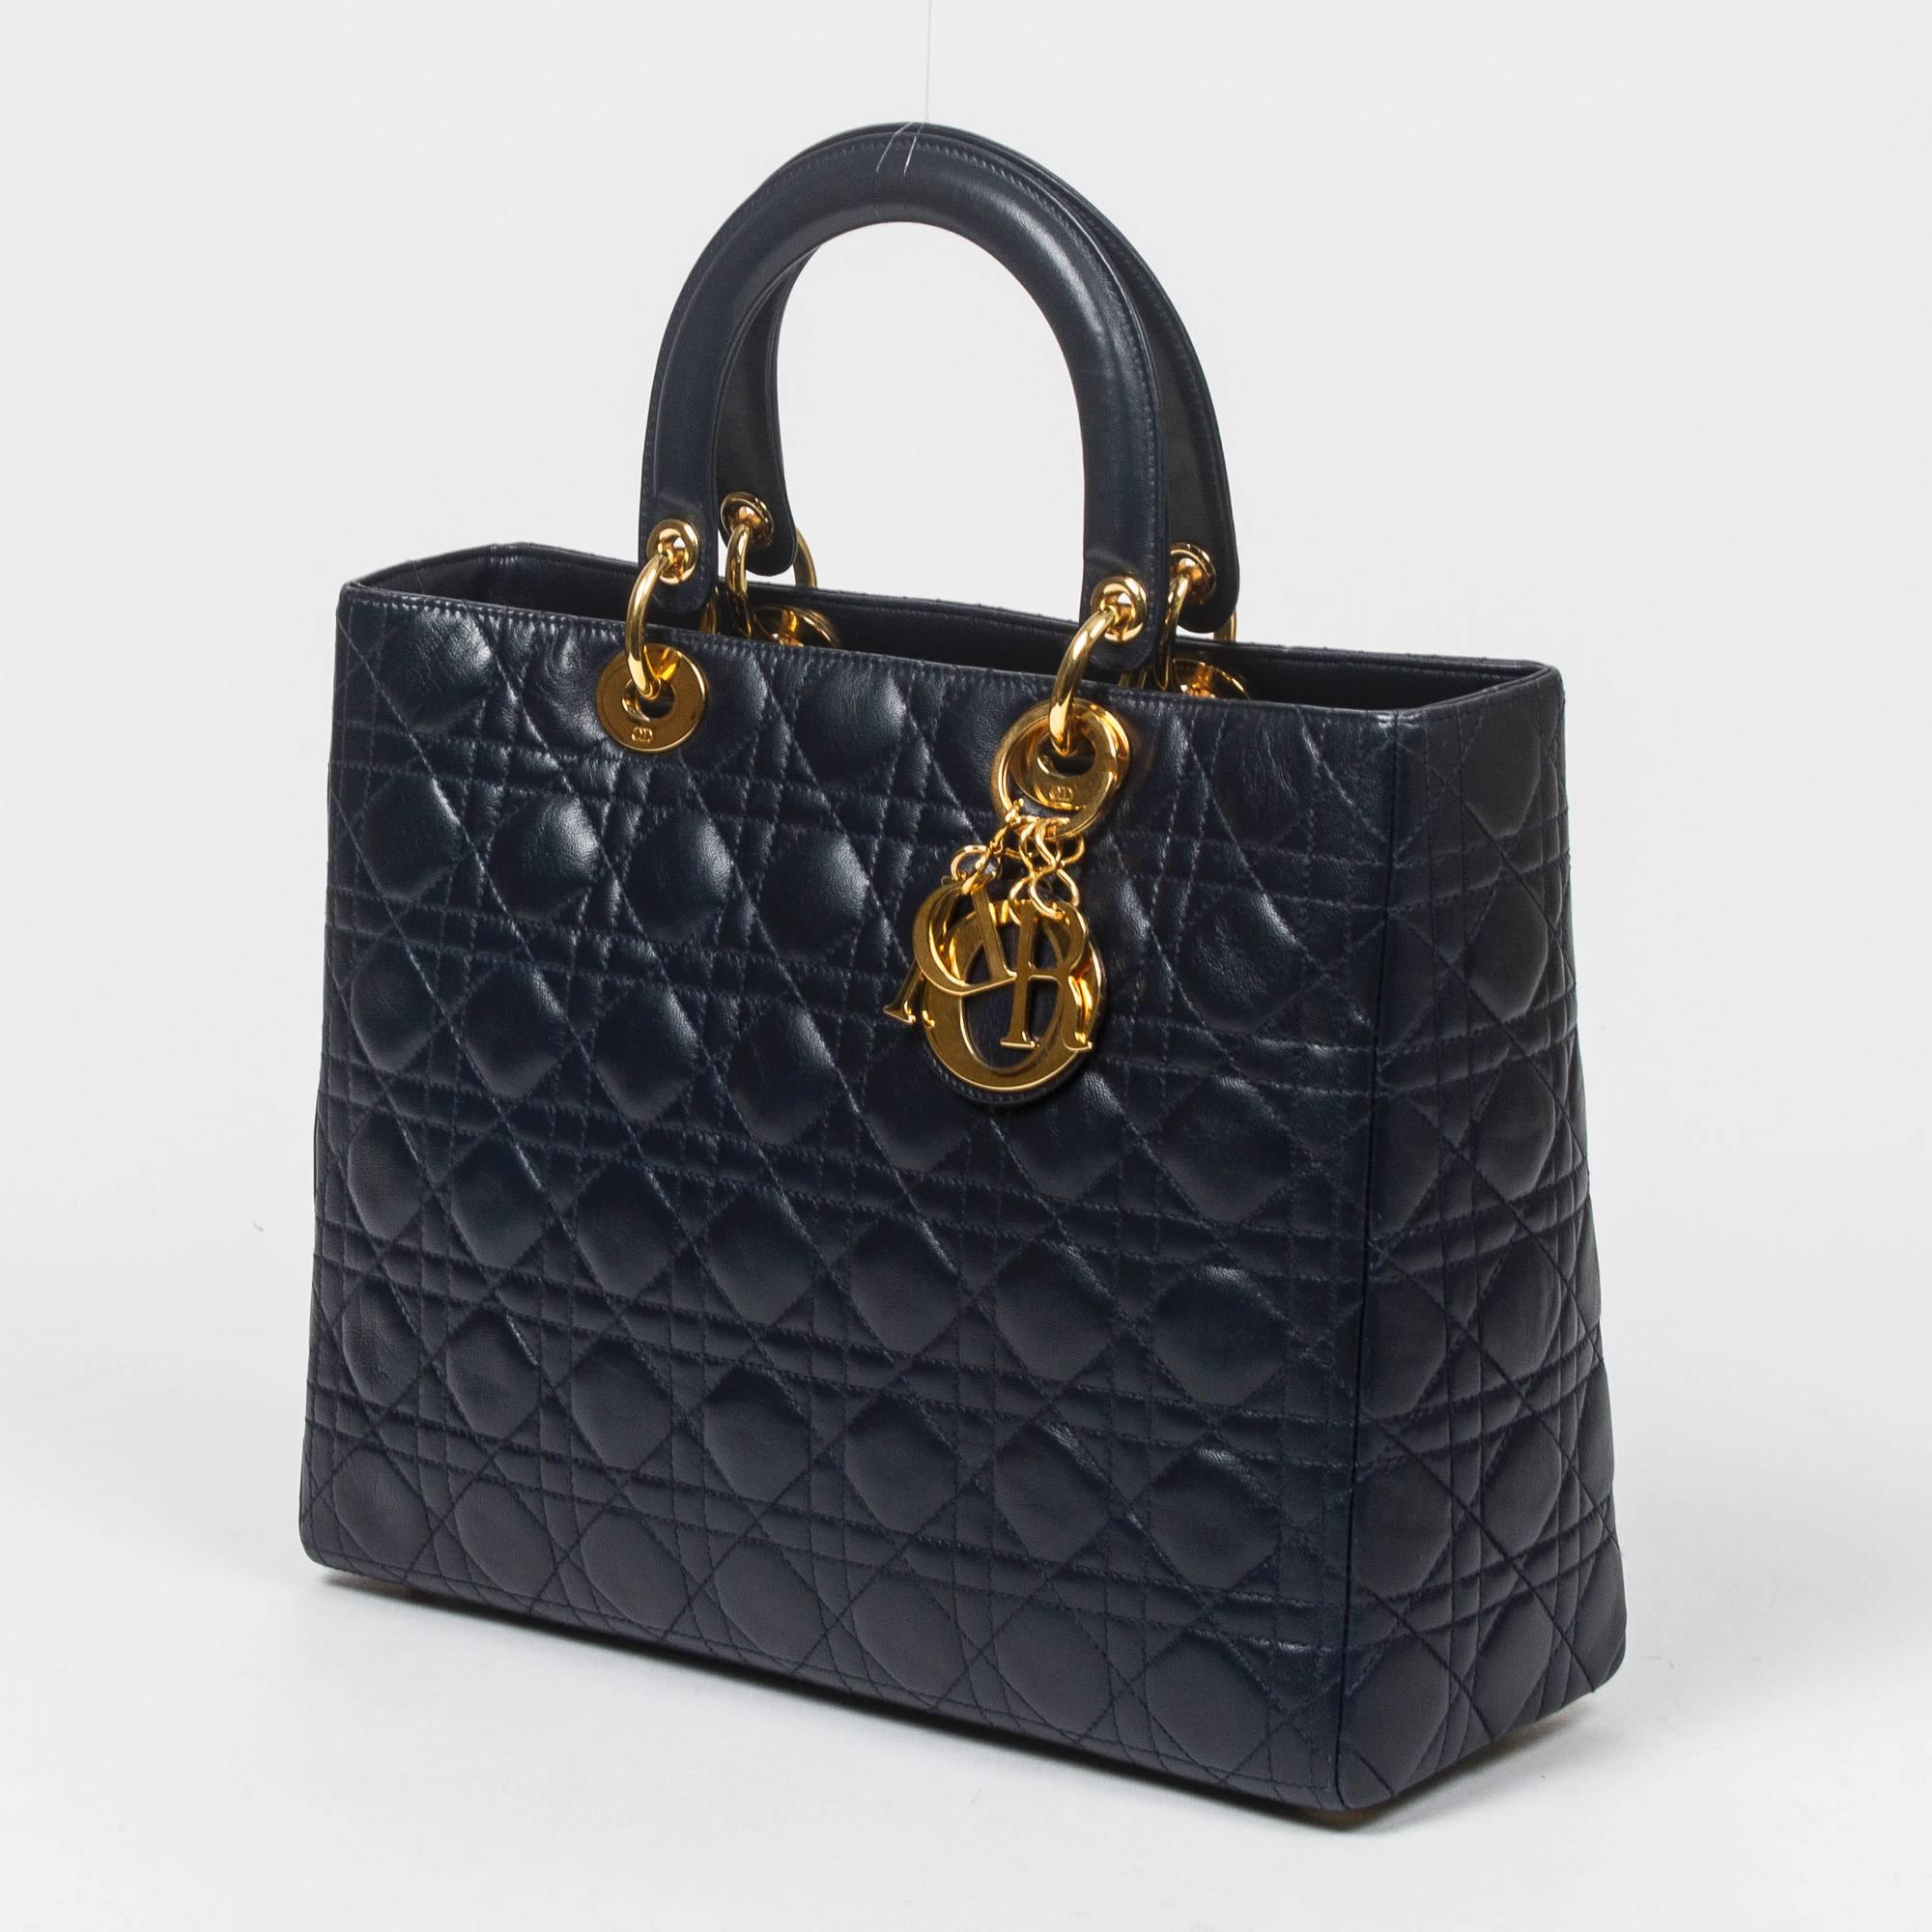 Lady Dior GM in navy blue cannage leather with optional shoulder strap and gold tone hardware. 5 protective feet. Zip closure. Red jacquard fabric lined interior with one zip pocket. Production number MA-0957. Model from 1997. There are some scuffs